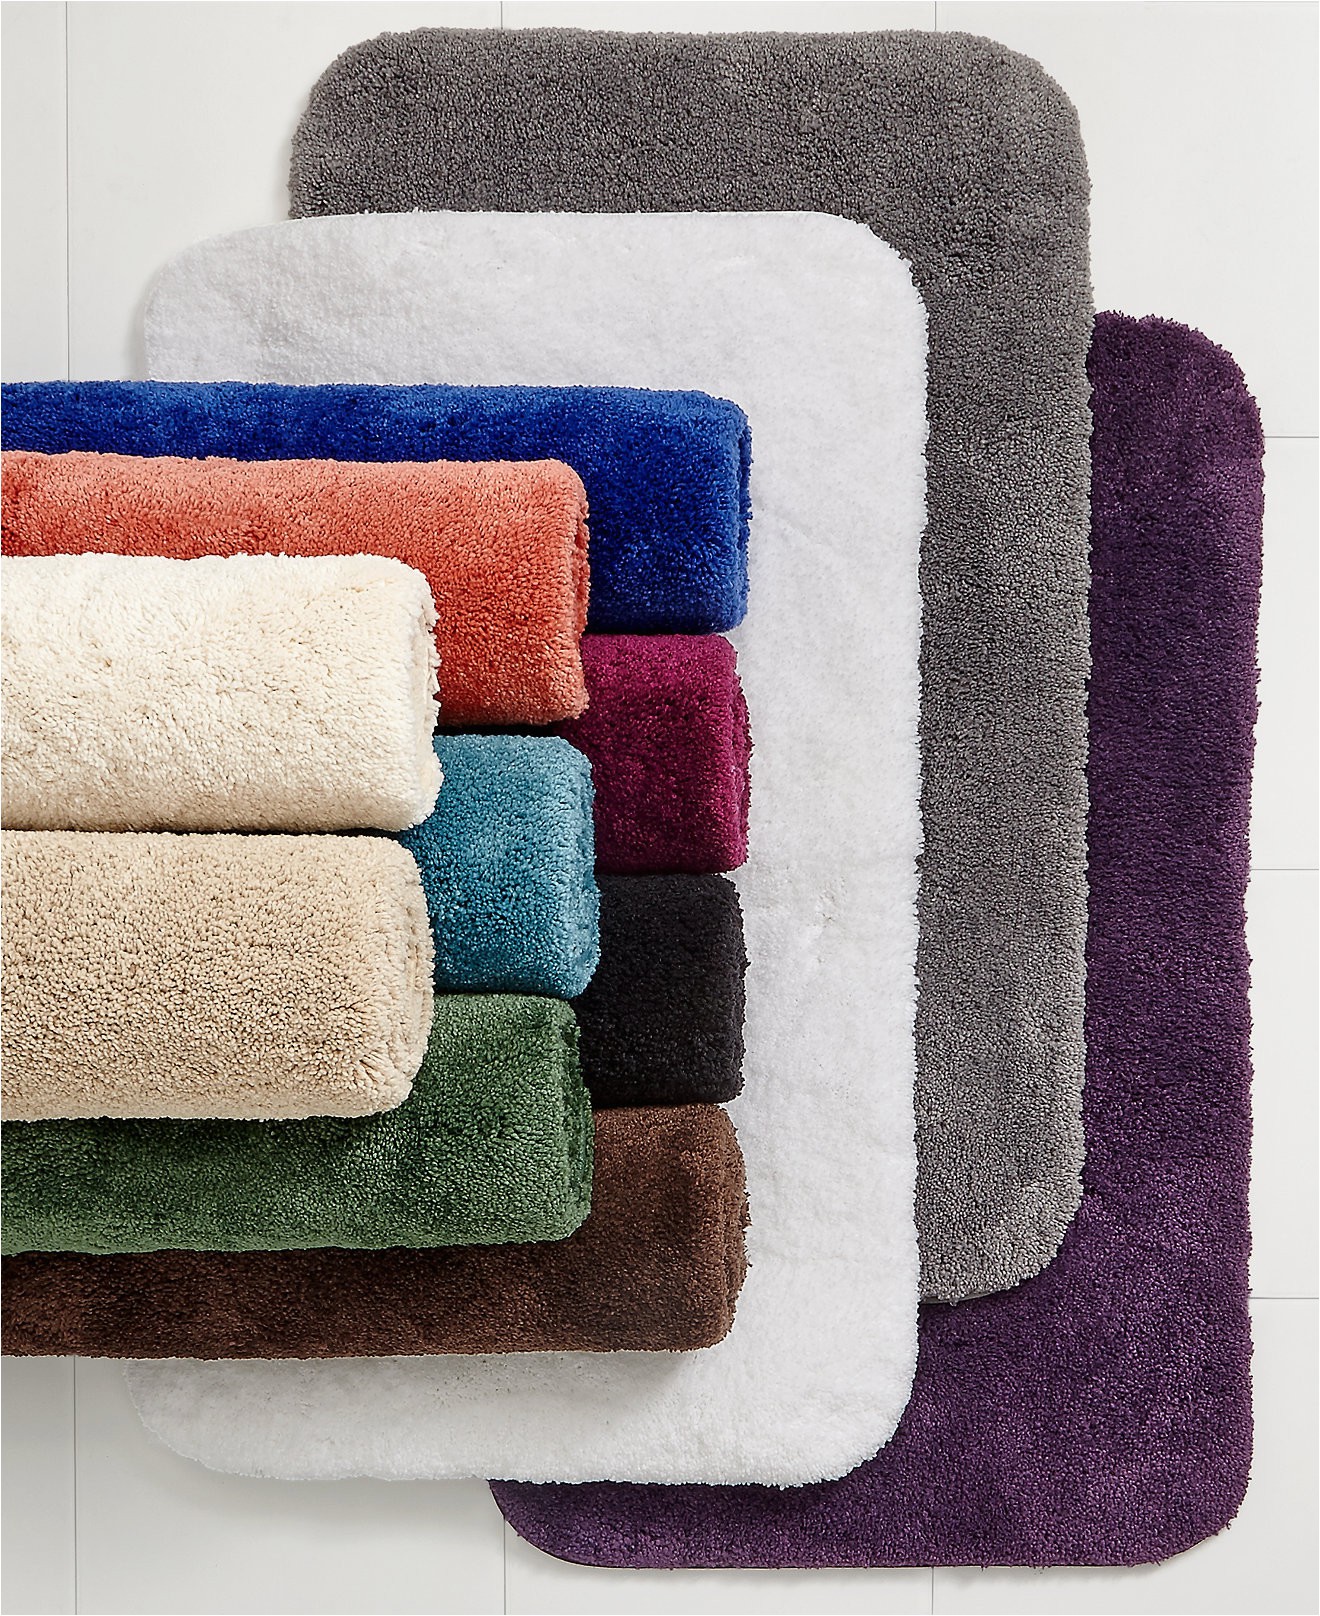 Cut to Fit Bath Rugs 3 Piece Bathroom Rug Set Bed Bath and Beyond Image Of